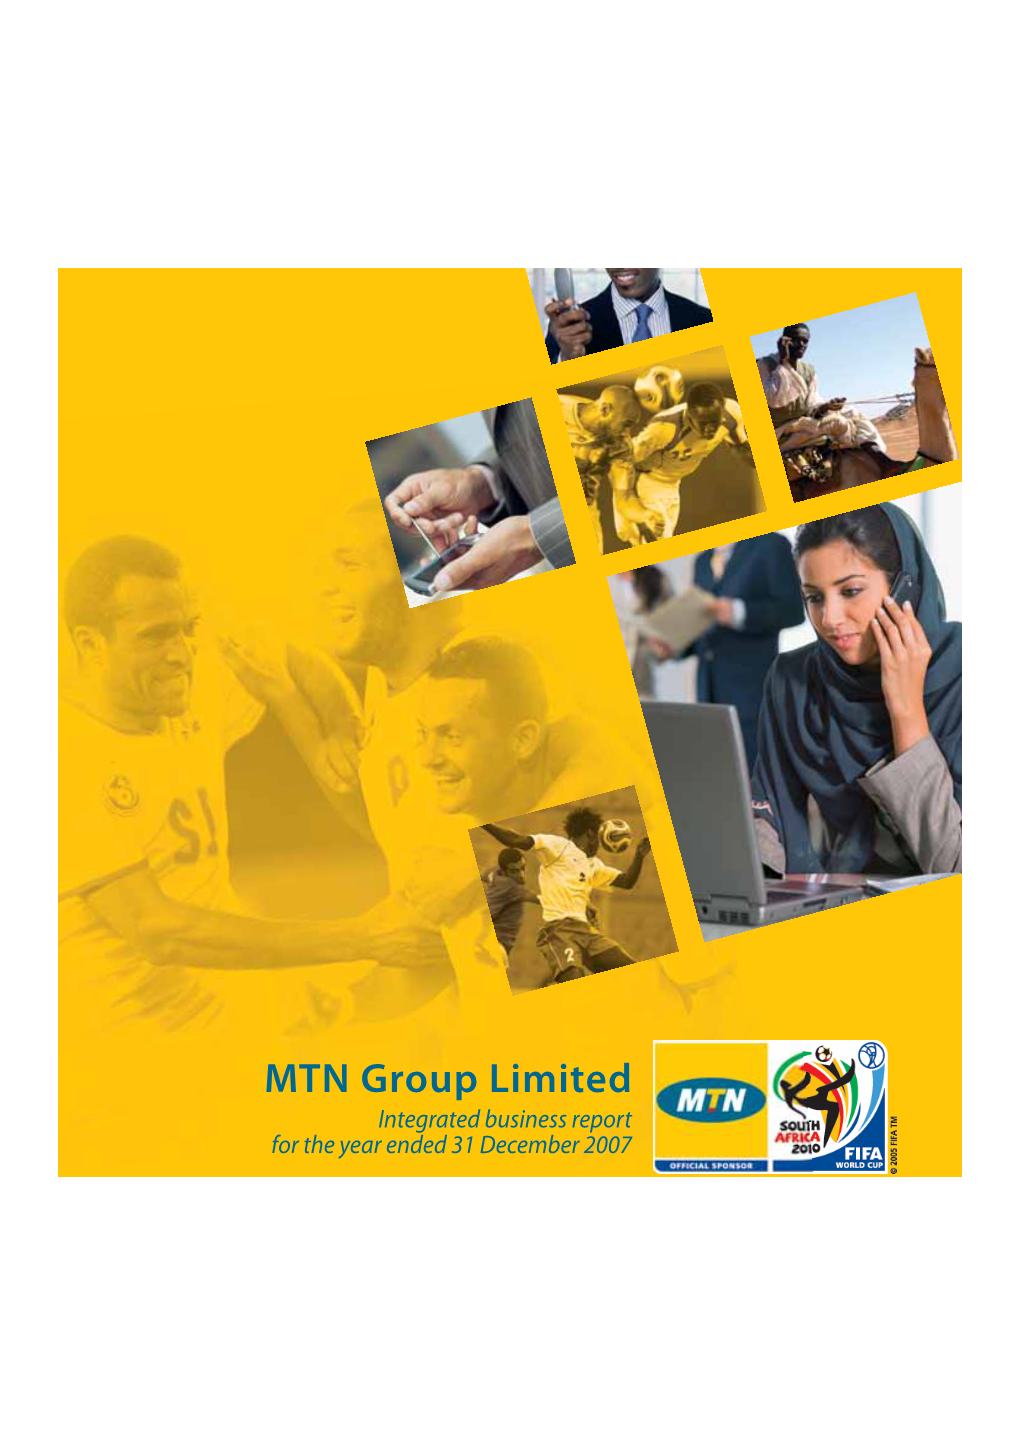 MTN Group Limited Integrated Business Report for the Year Ended 31 December 2007 Is to Be the Leading Our Vision